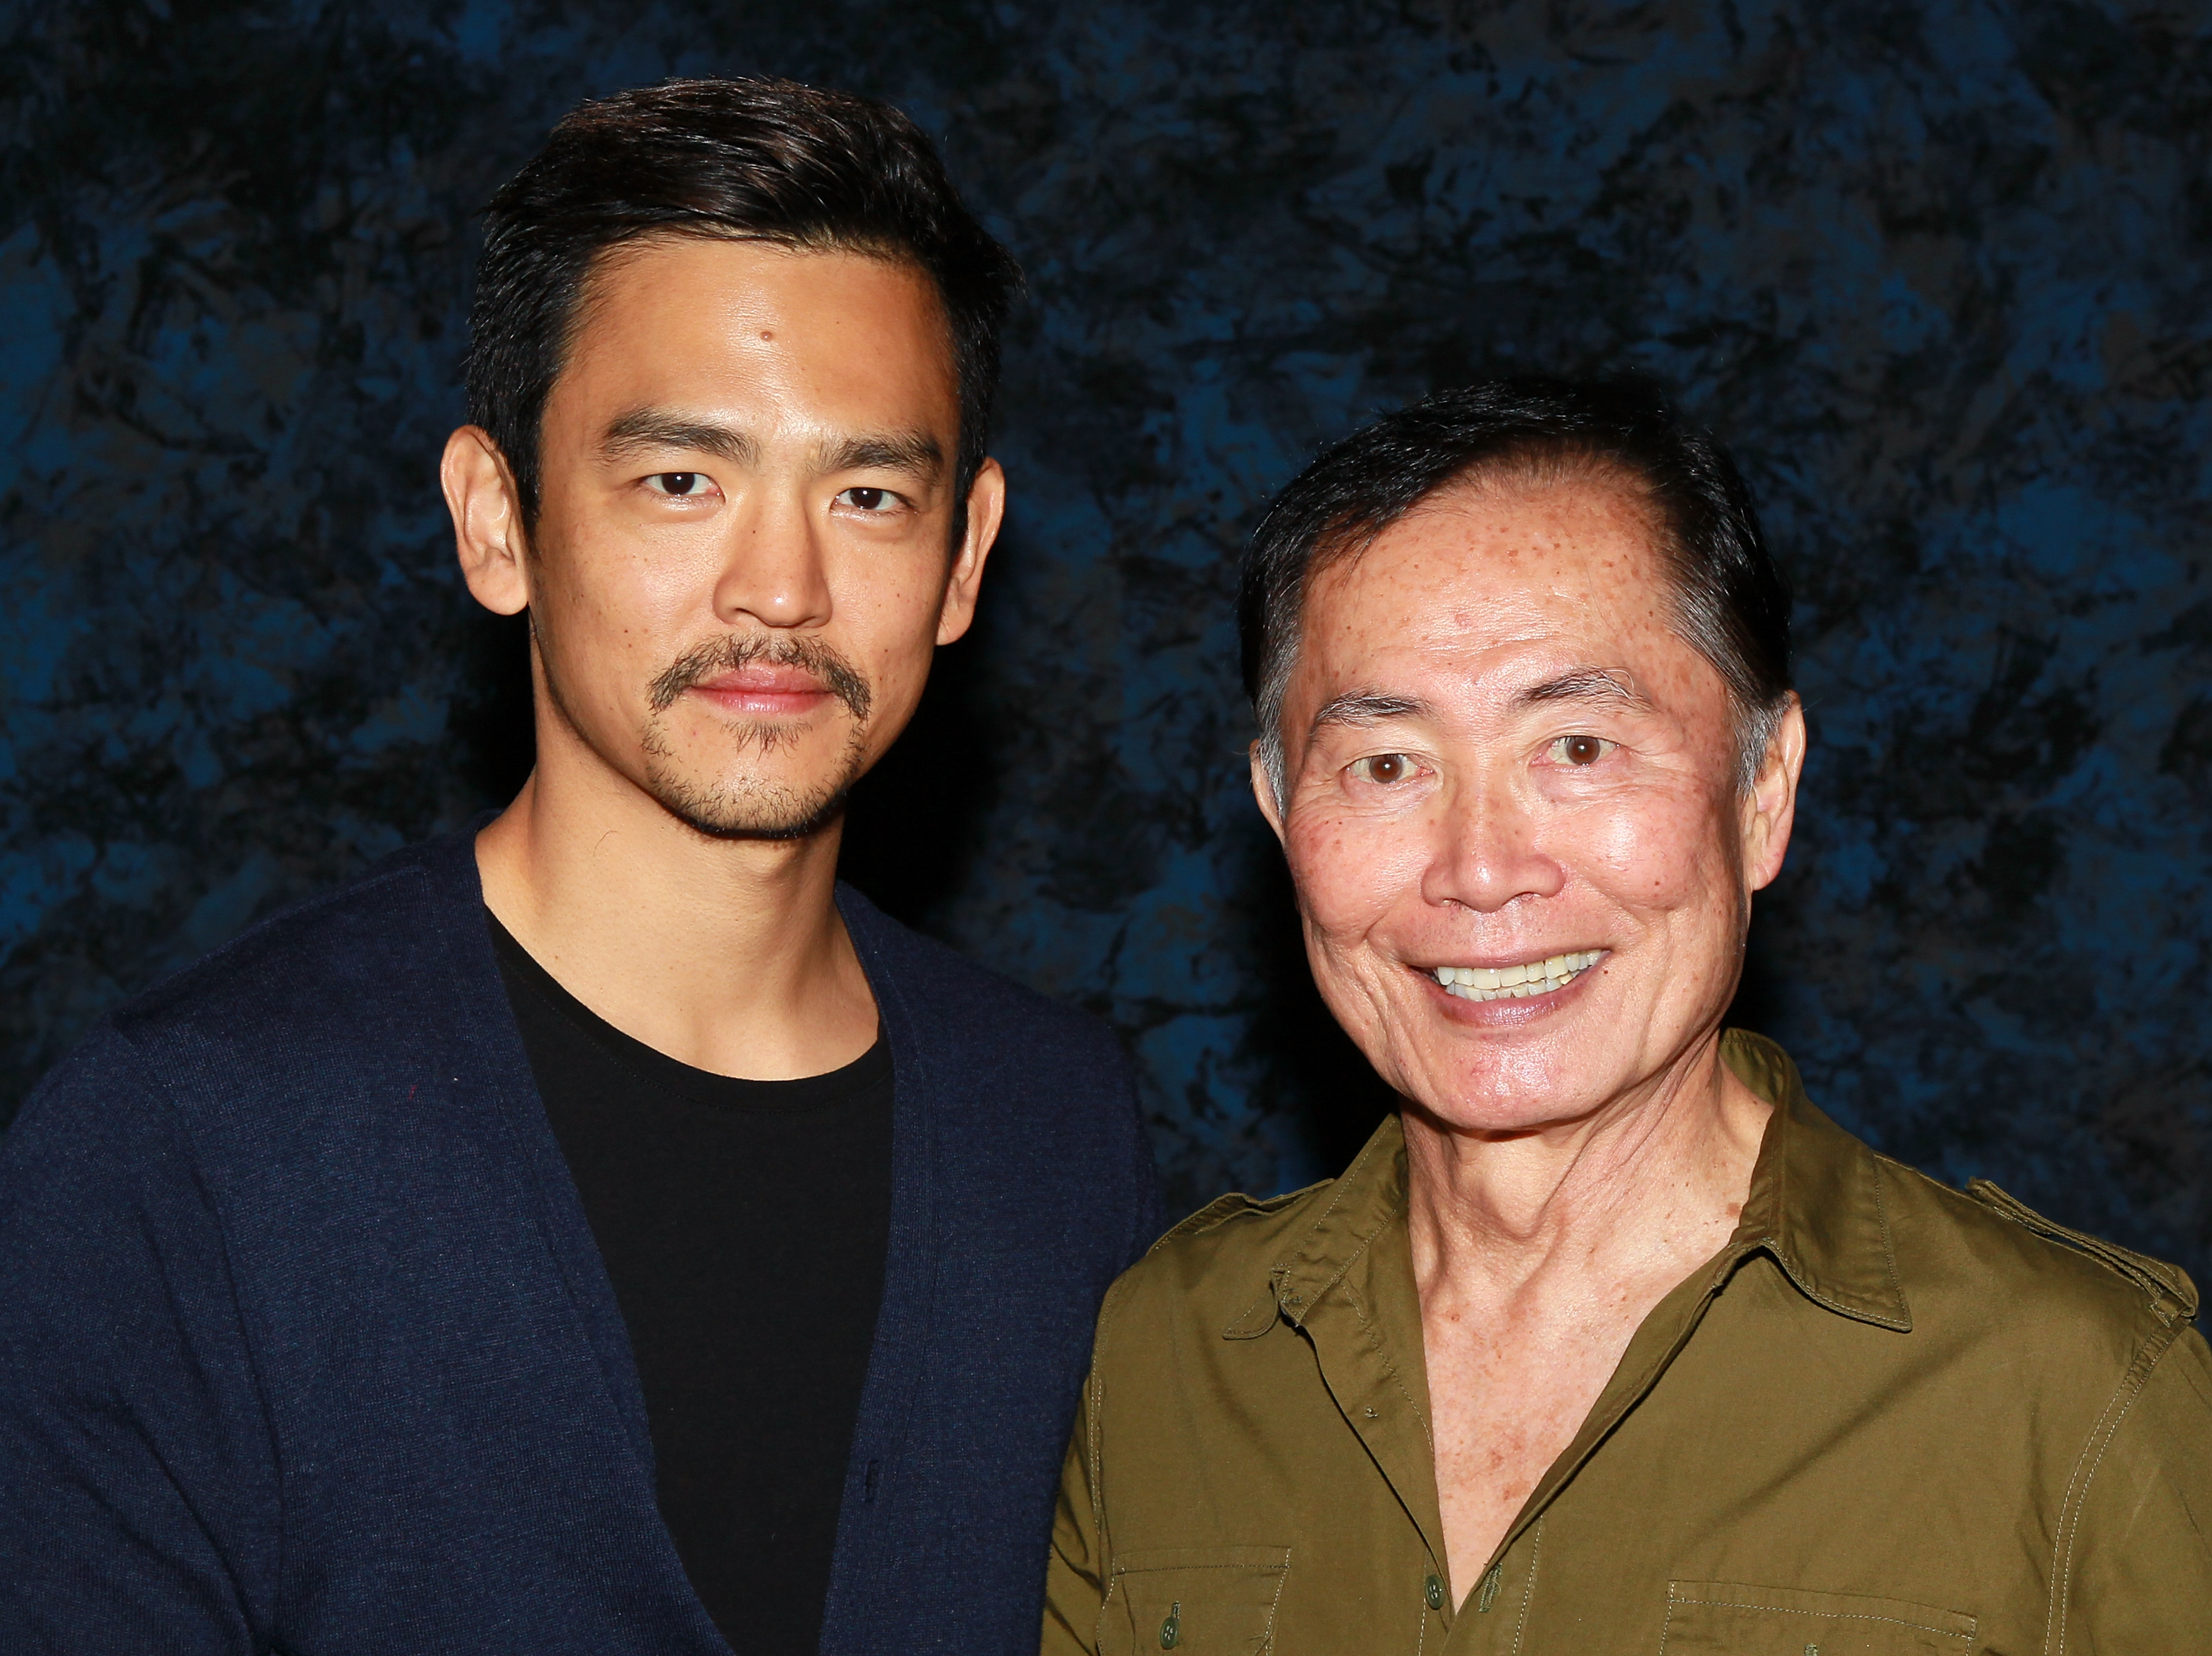 John Cho (L) and George Takei attend the Official Star Trek Convention on August 14, 2011 in Las Vegas, Nevada. (David Livingston—Getty Images)